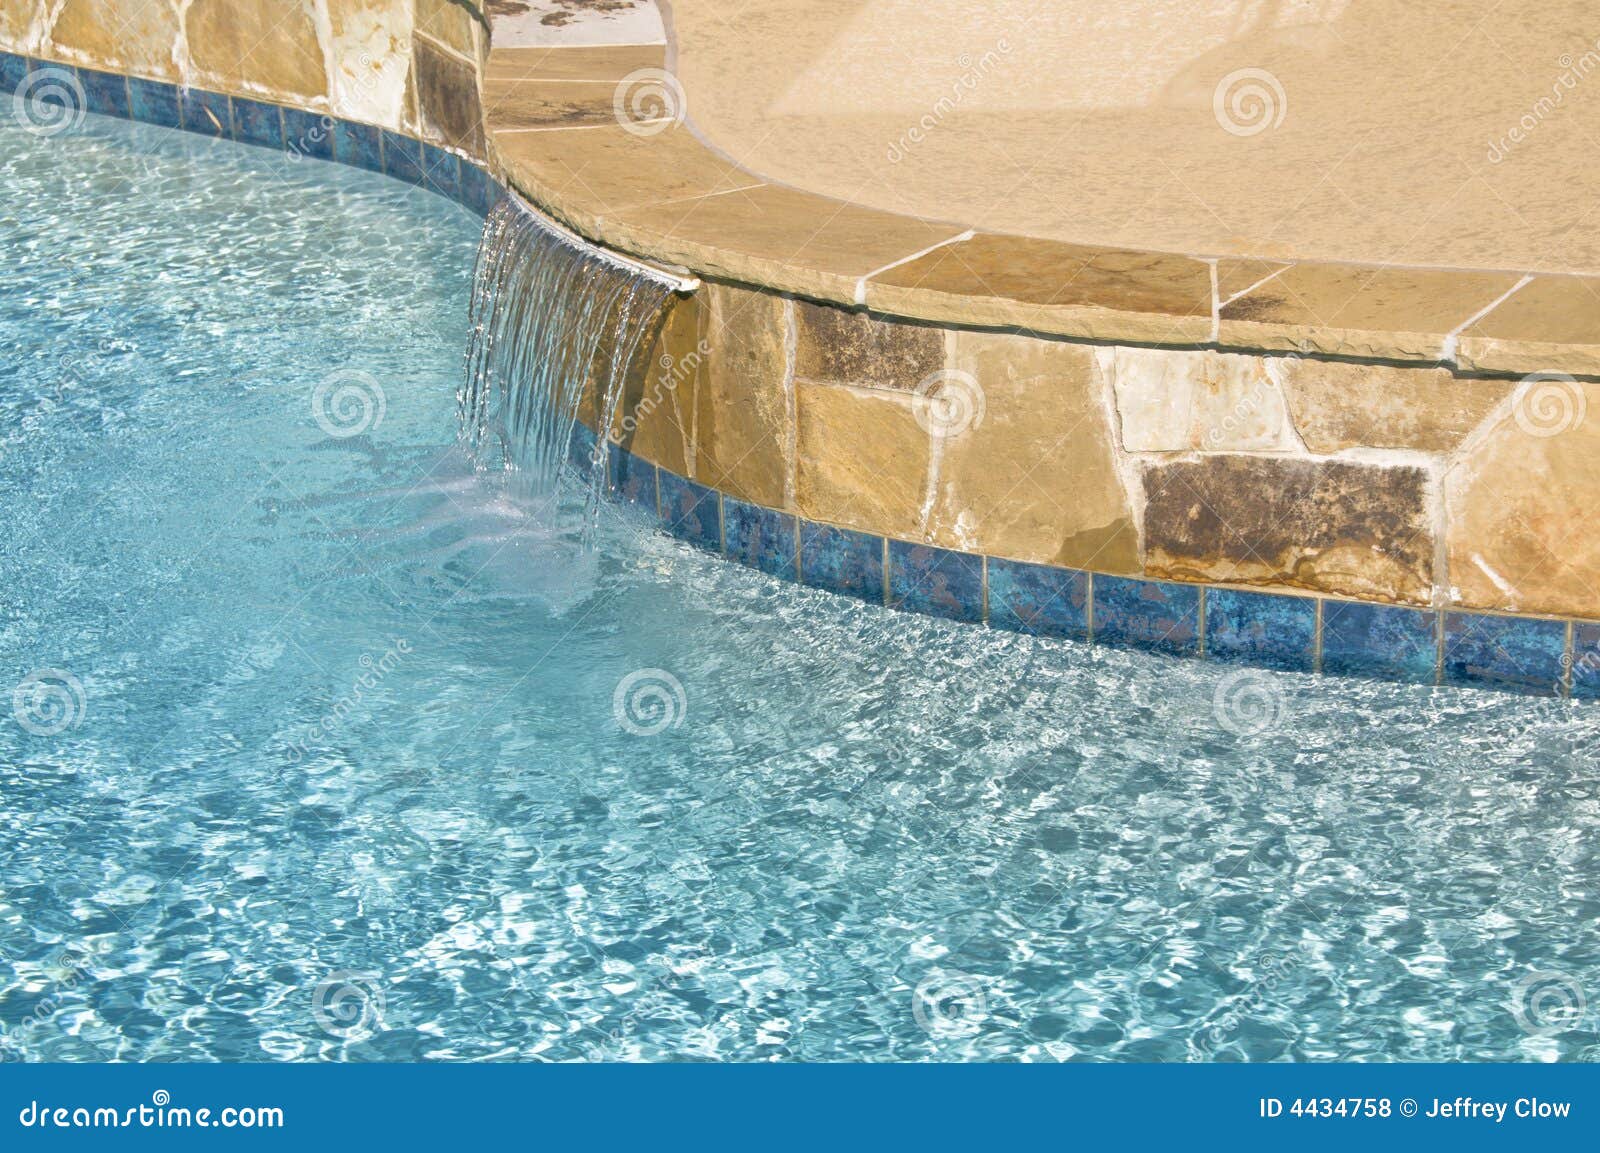 suburban pool water feature